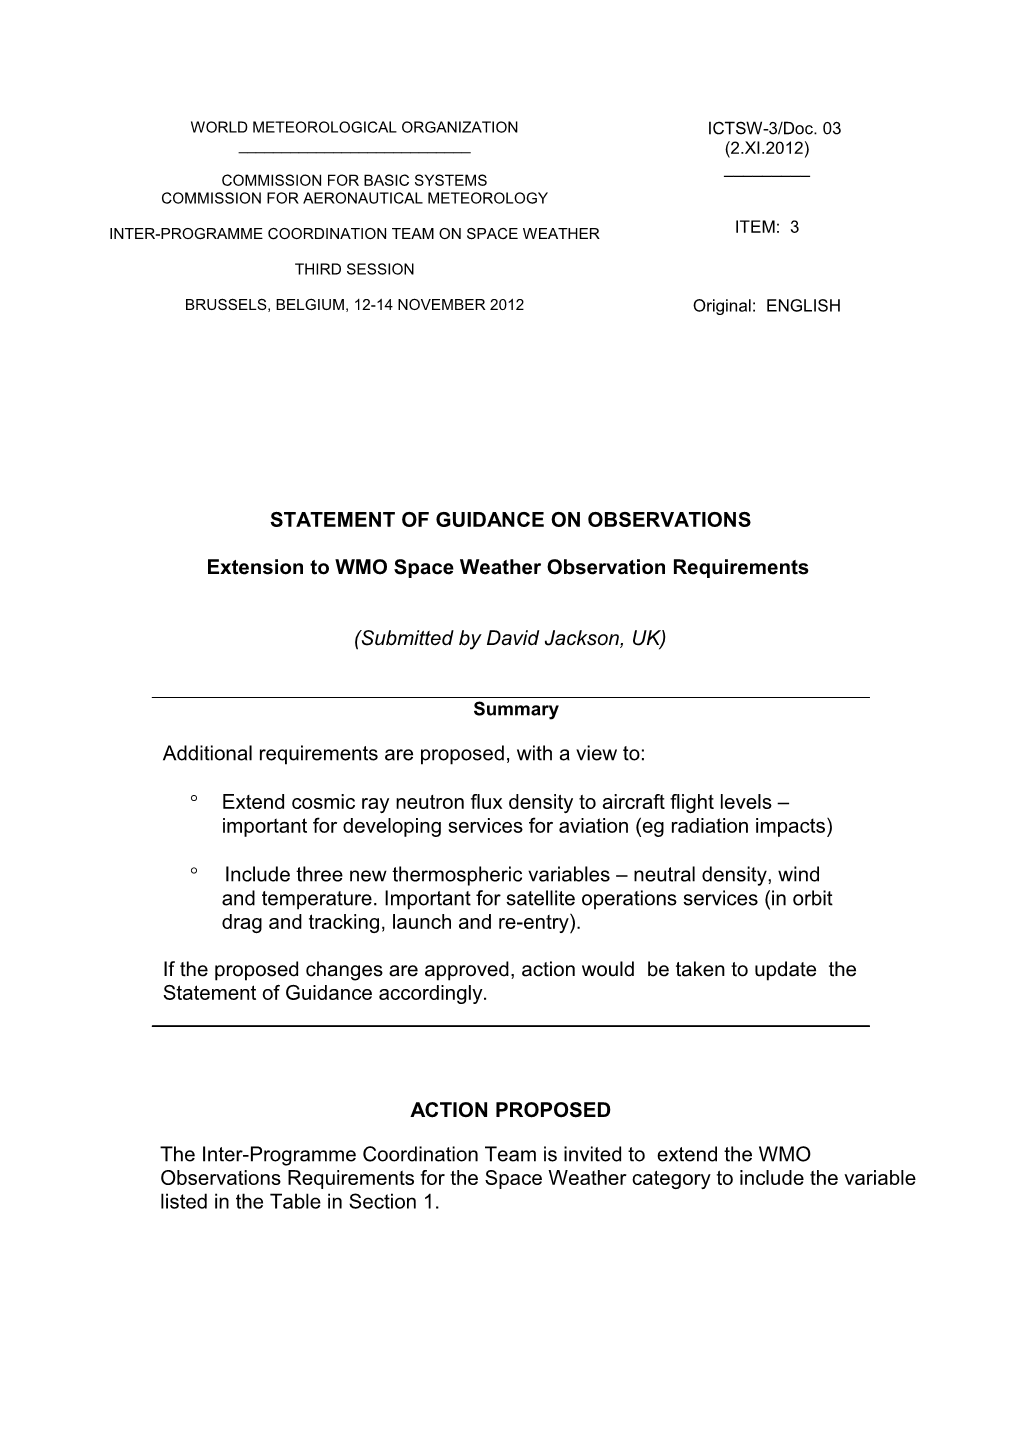 Extension to WMO Space Weather Observation Requirements